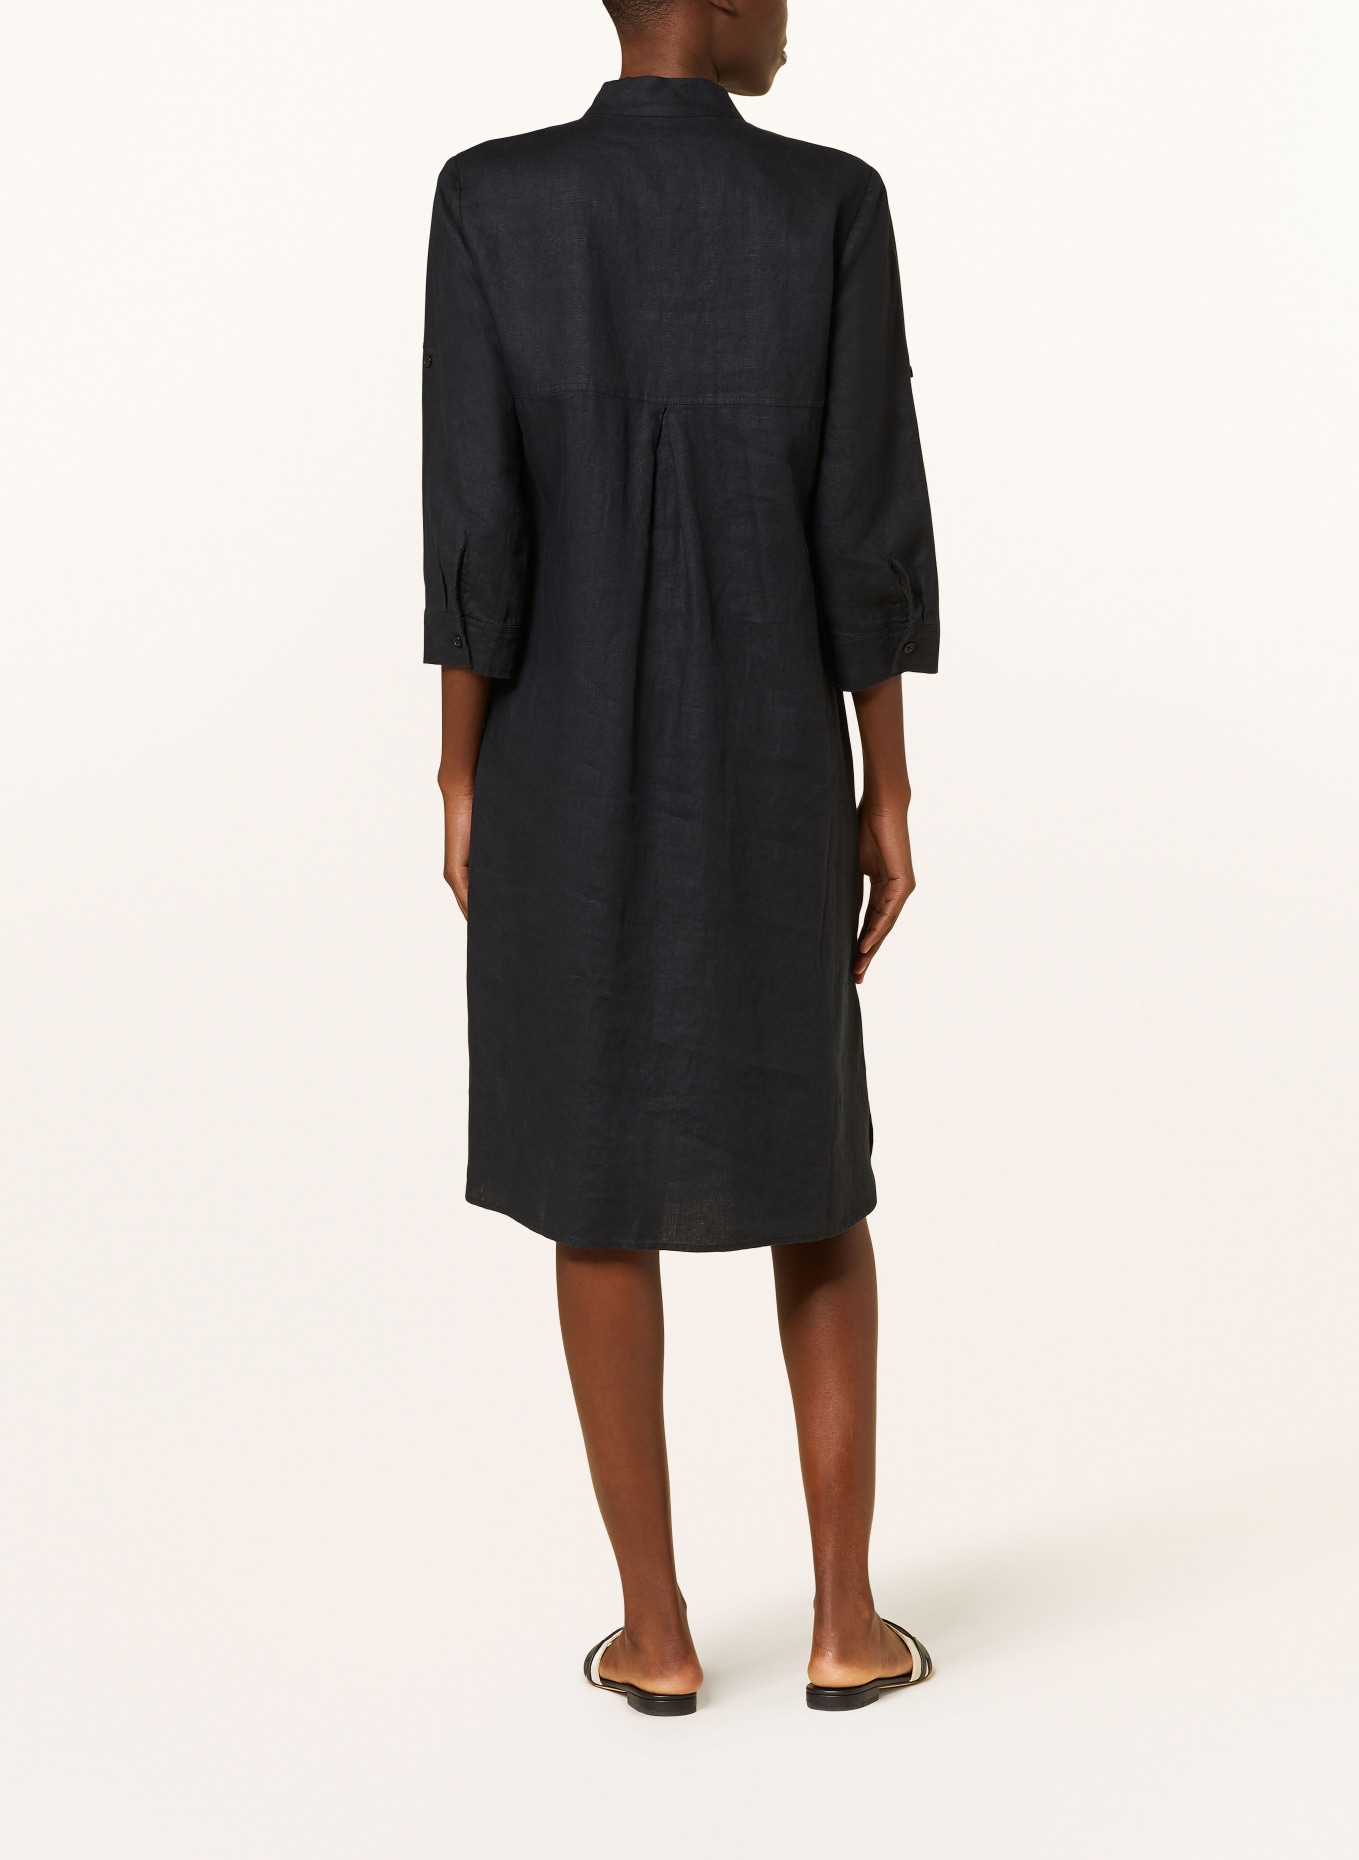 lilienfels Linen dress with 3/4 sleeves, Color: 10906 schwarz (Image 3)